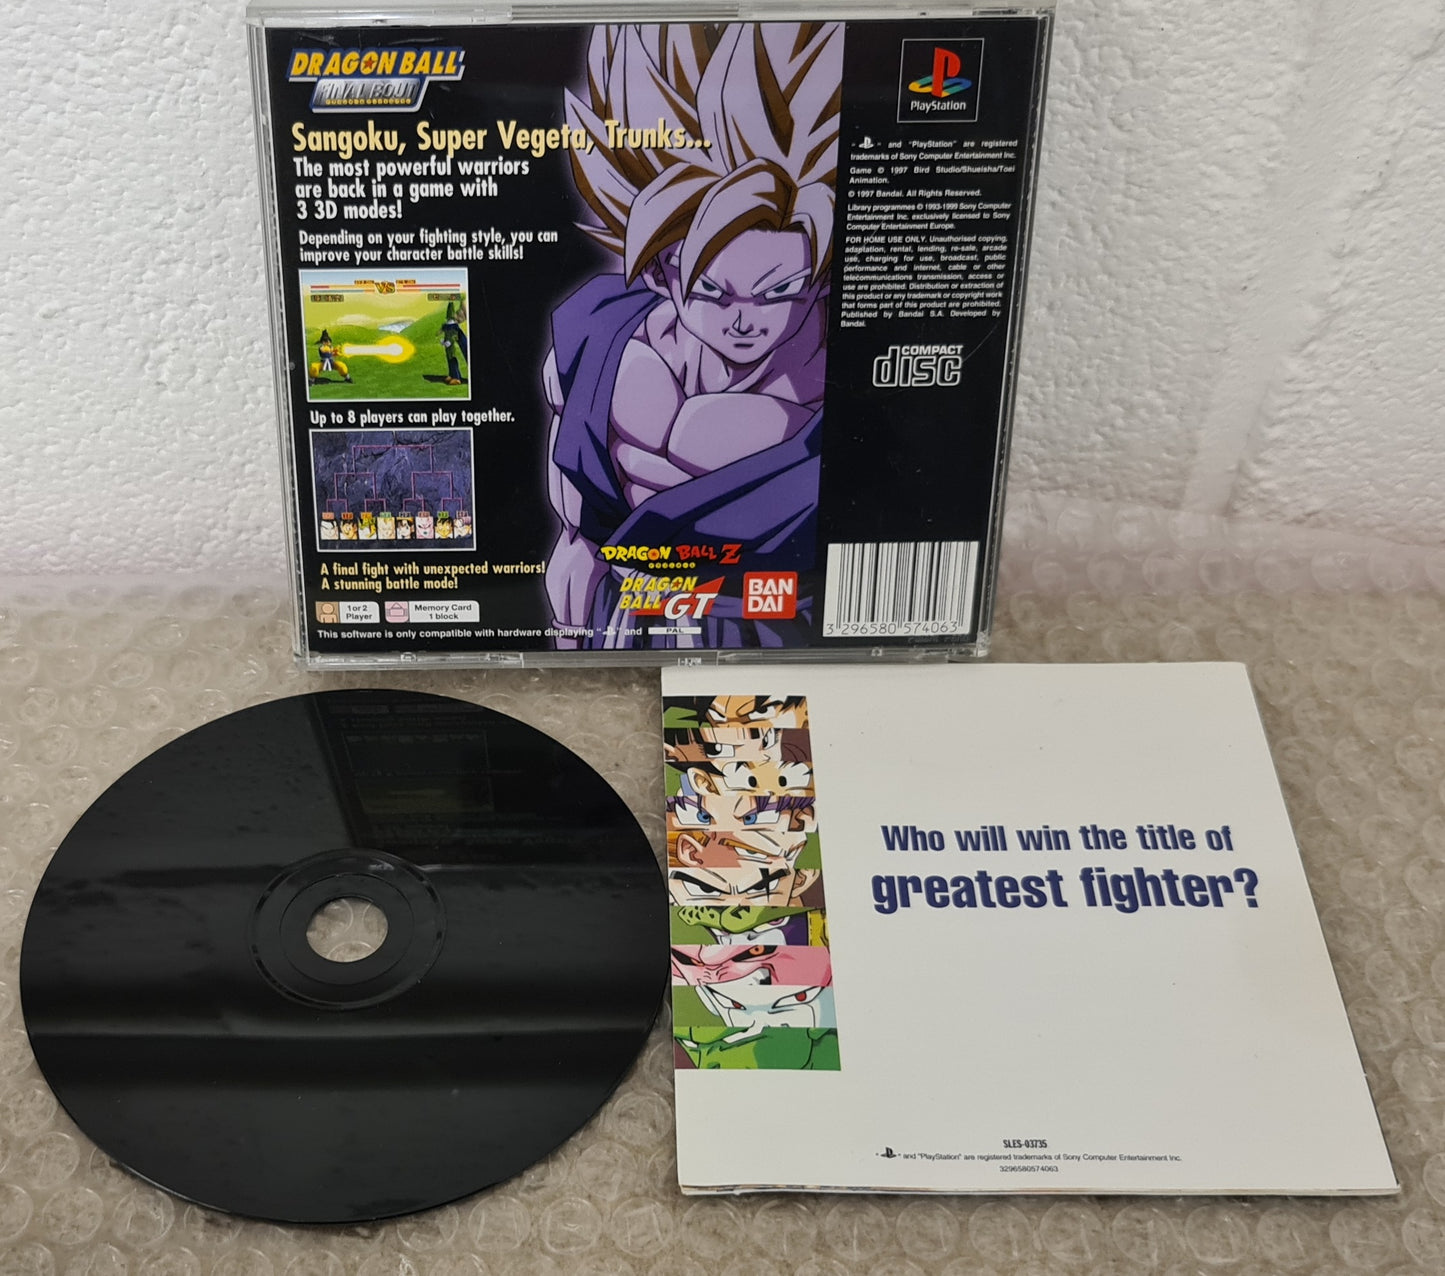 Dragon Ball Final Bout Sony Playstation 1 (PS1) Game